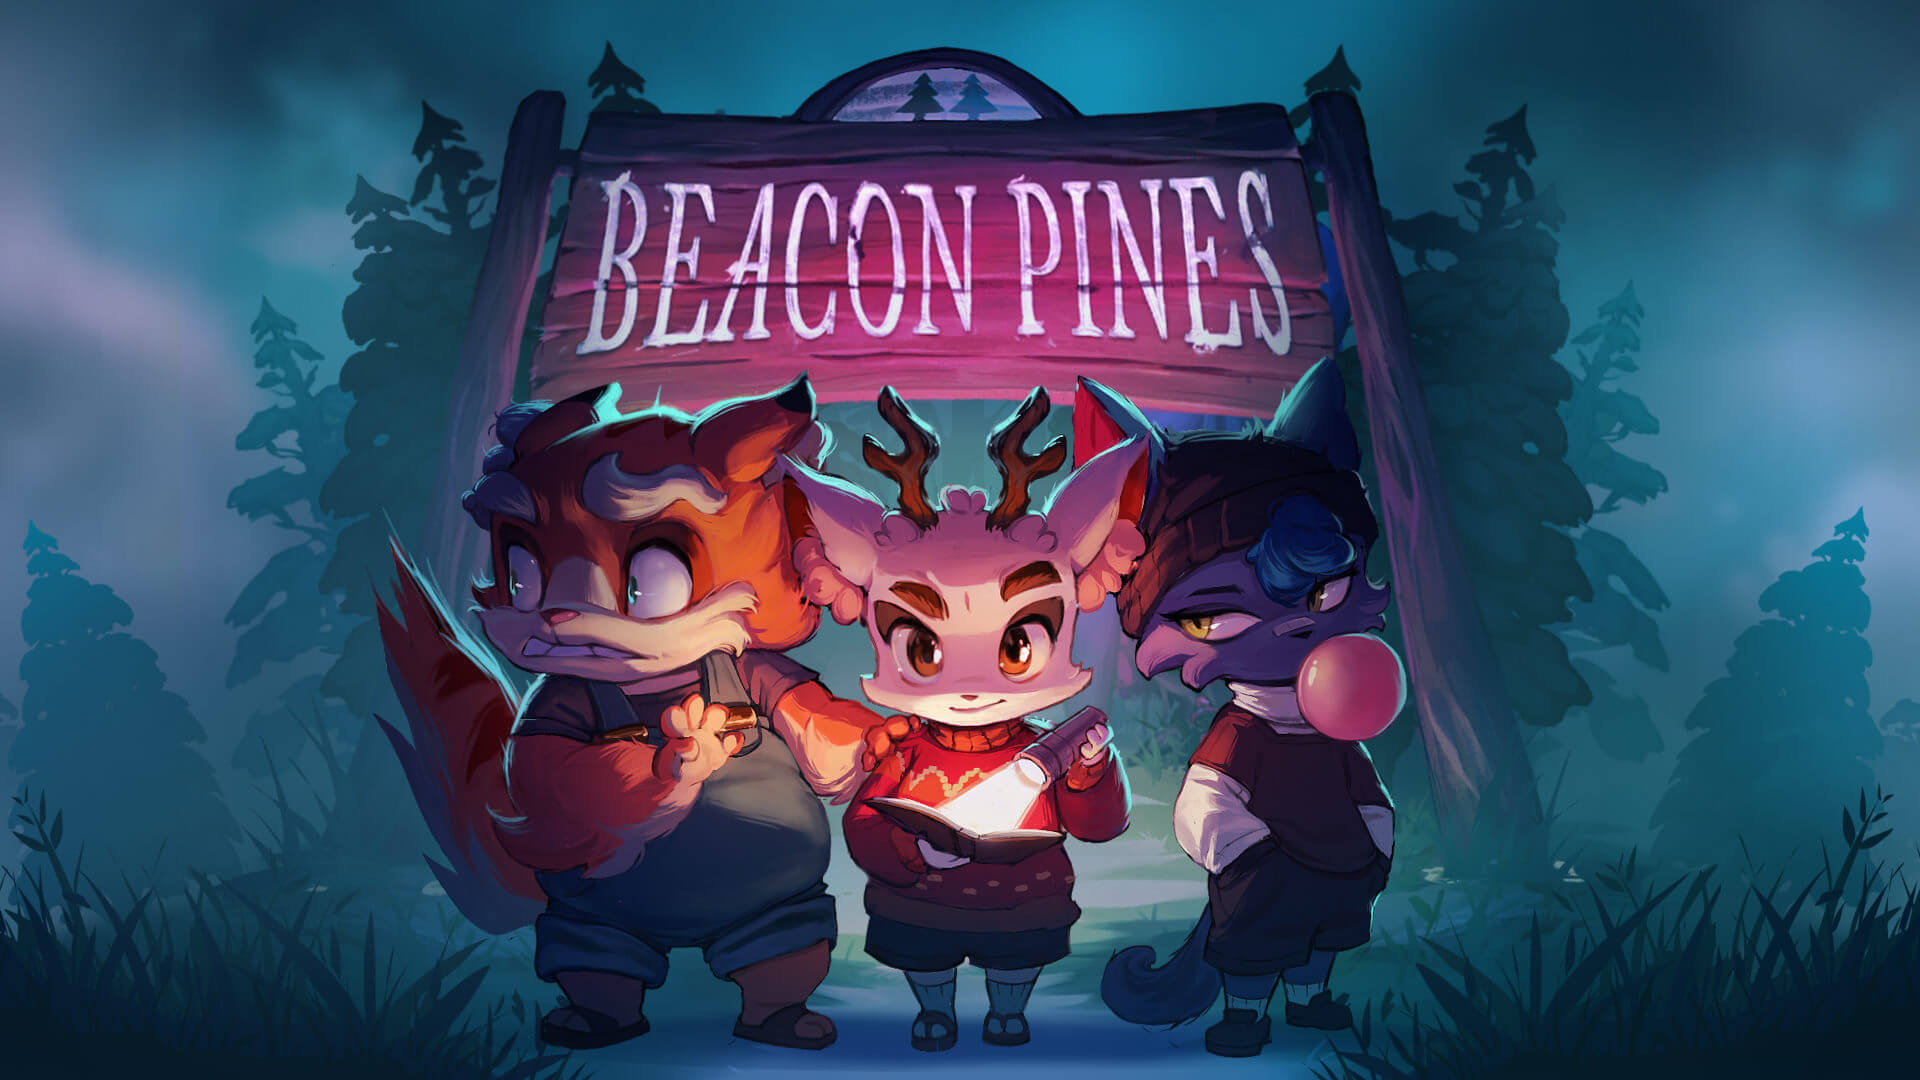  Beacon Pines is a cozy horror game that hides an emotional mystery beneath cute characters 